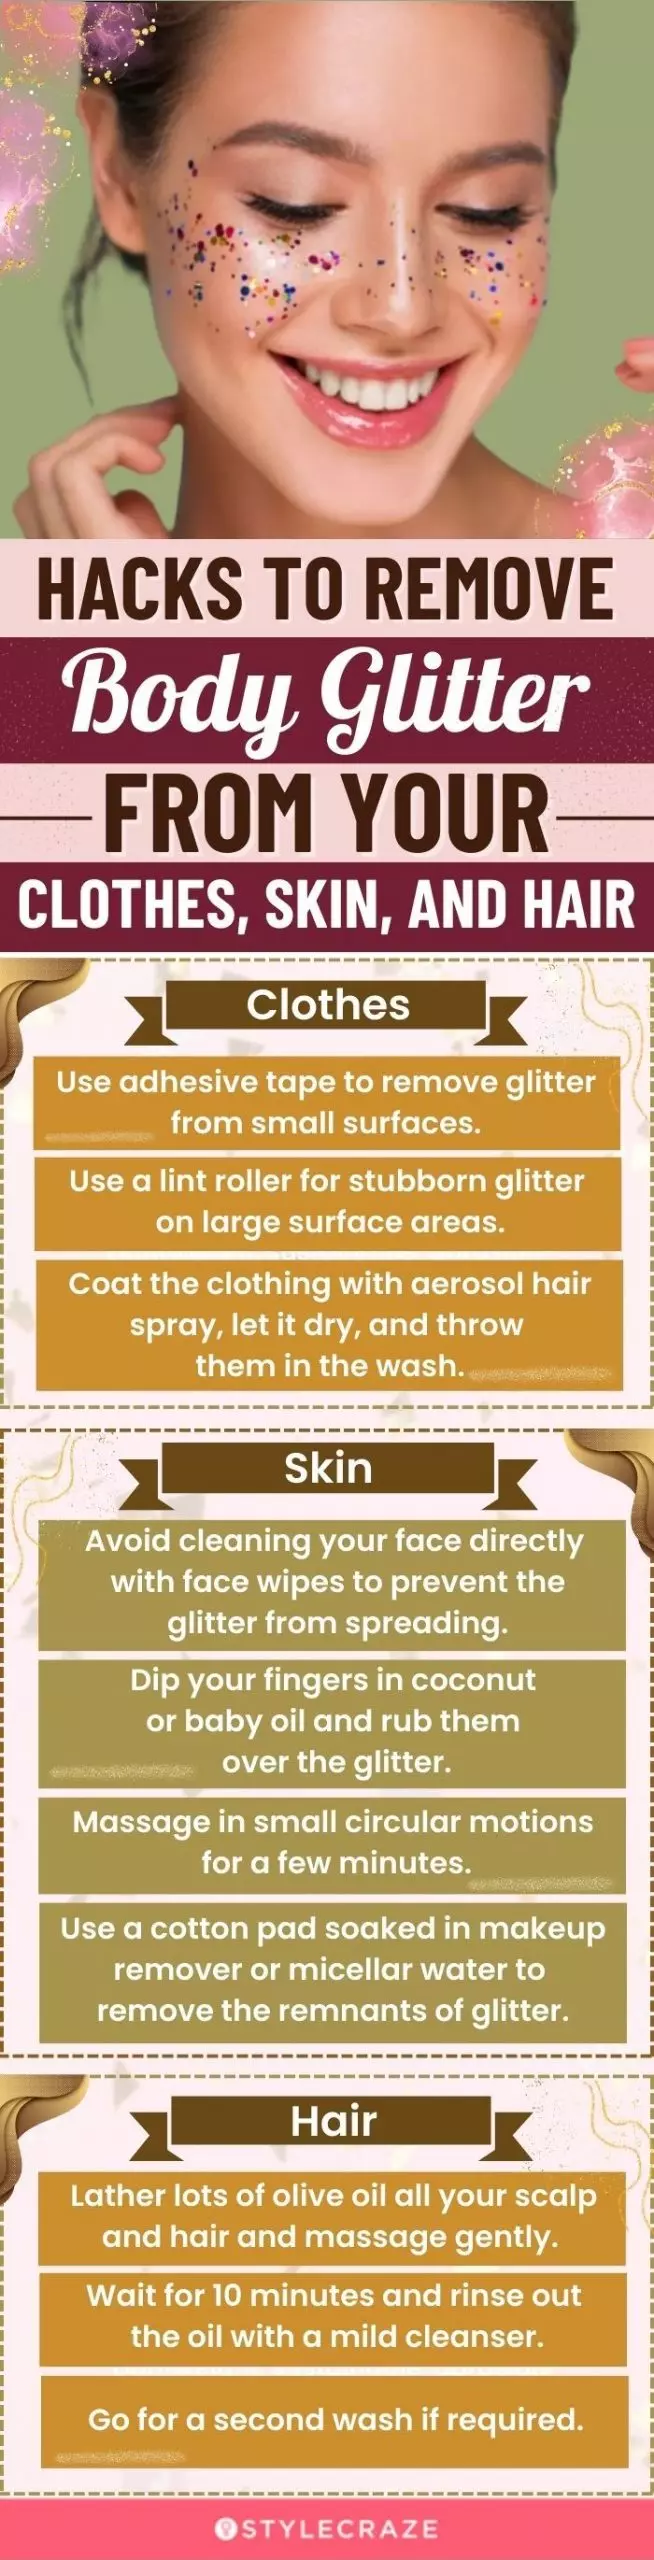 Hacks To Remove Body Glitter From Your Clothes, Skin, And Hair(infographic)